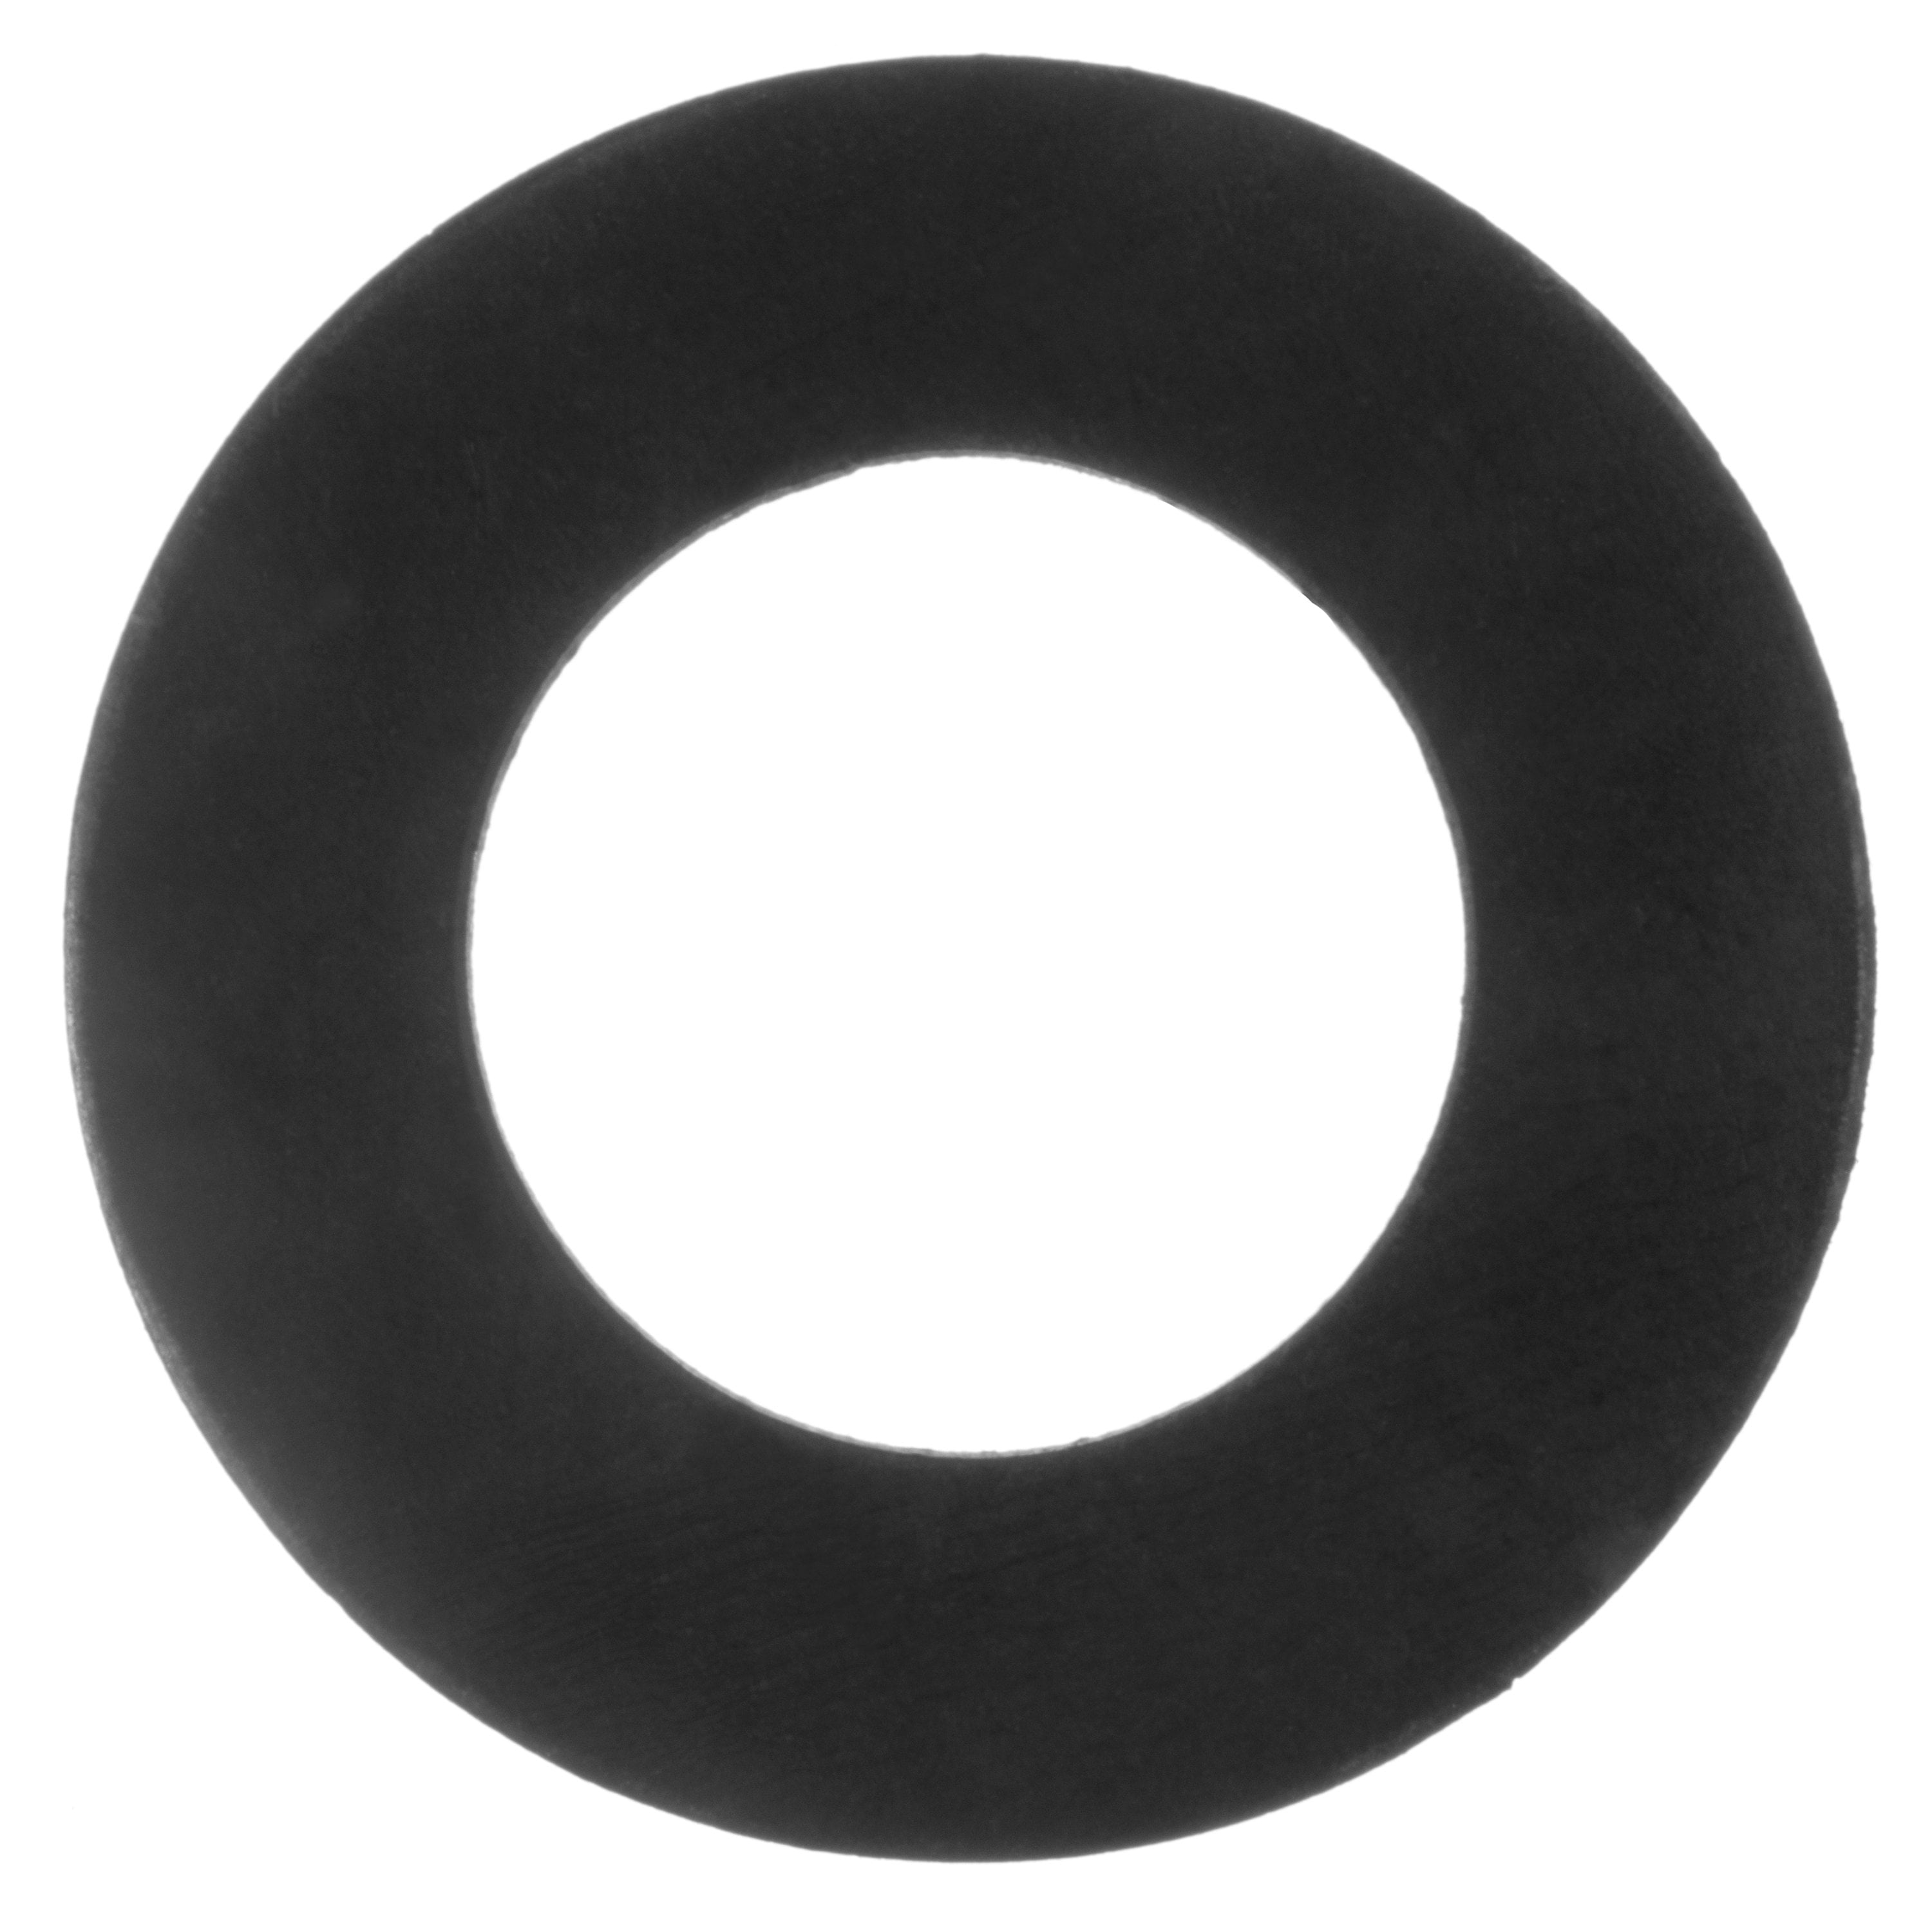 USA Sealing Full Face Viton Rubber Flange Gasket for 6 Pipe Class 150 1/8 Thick 